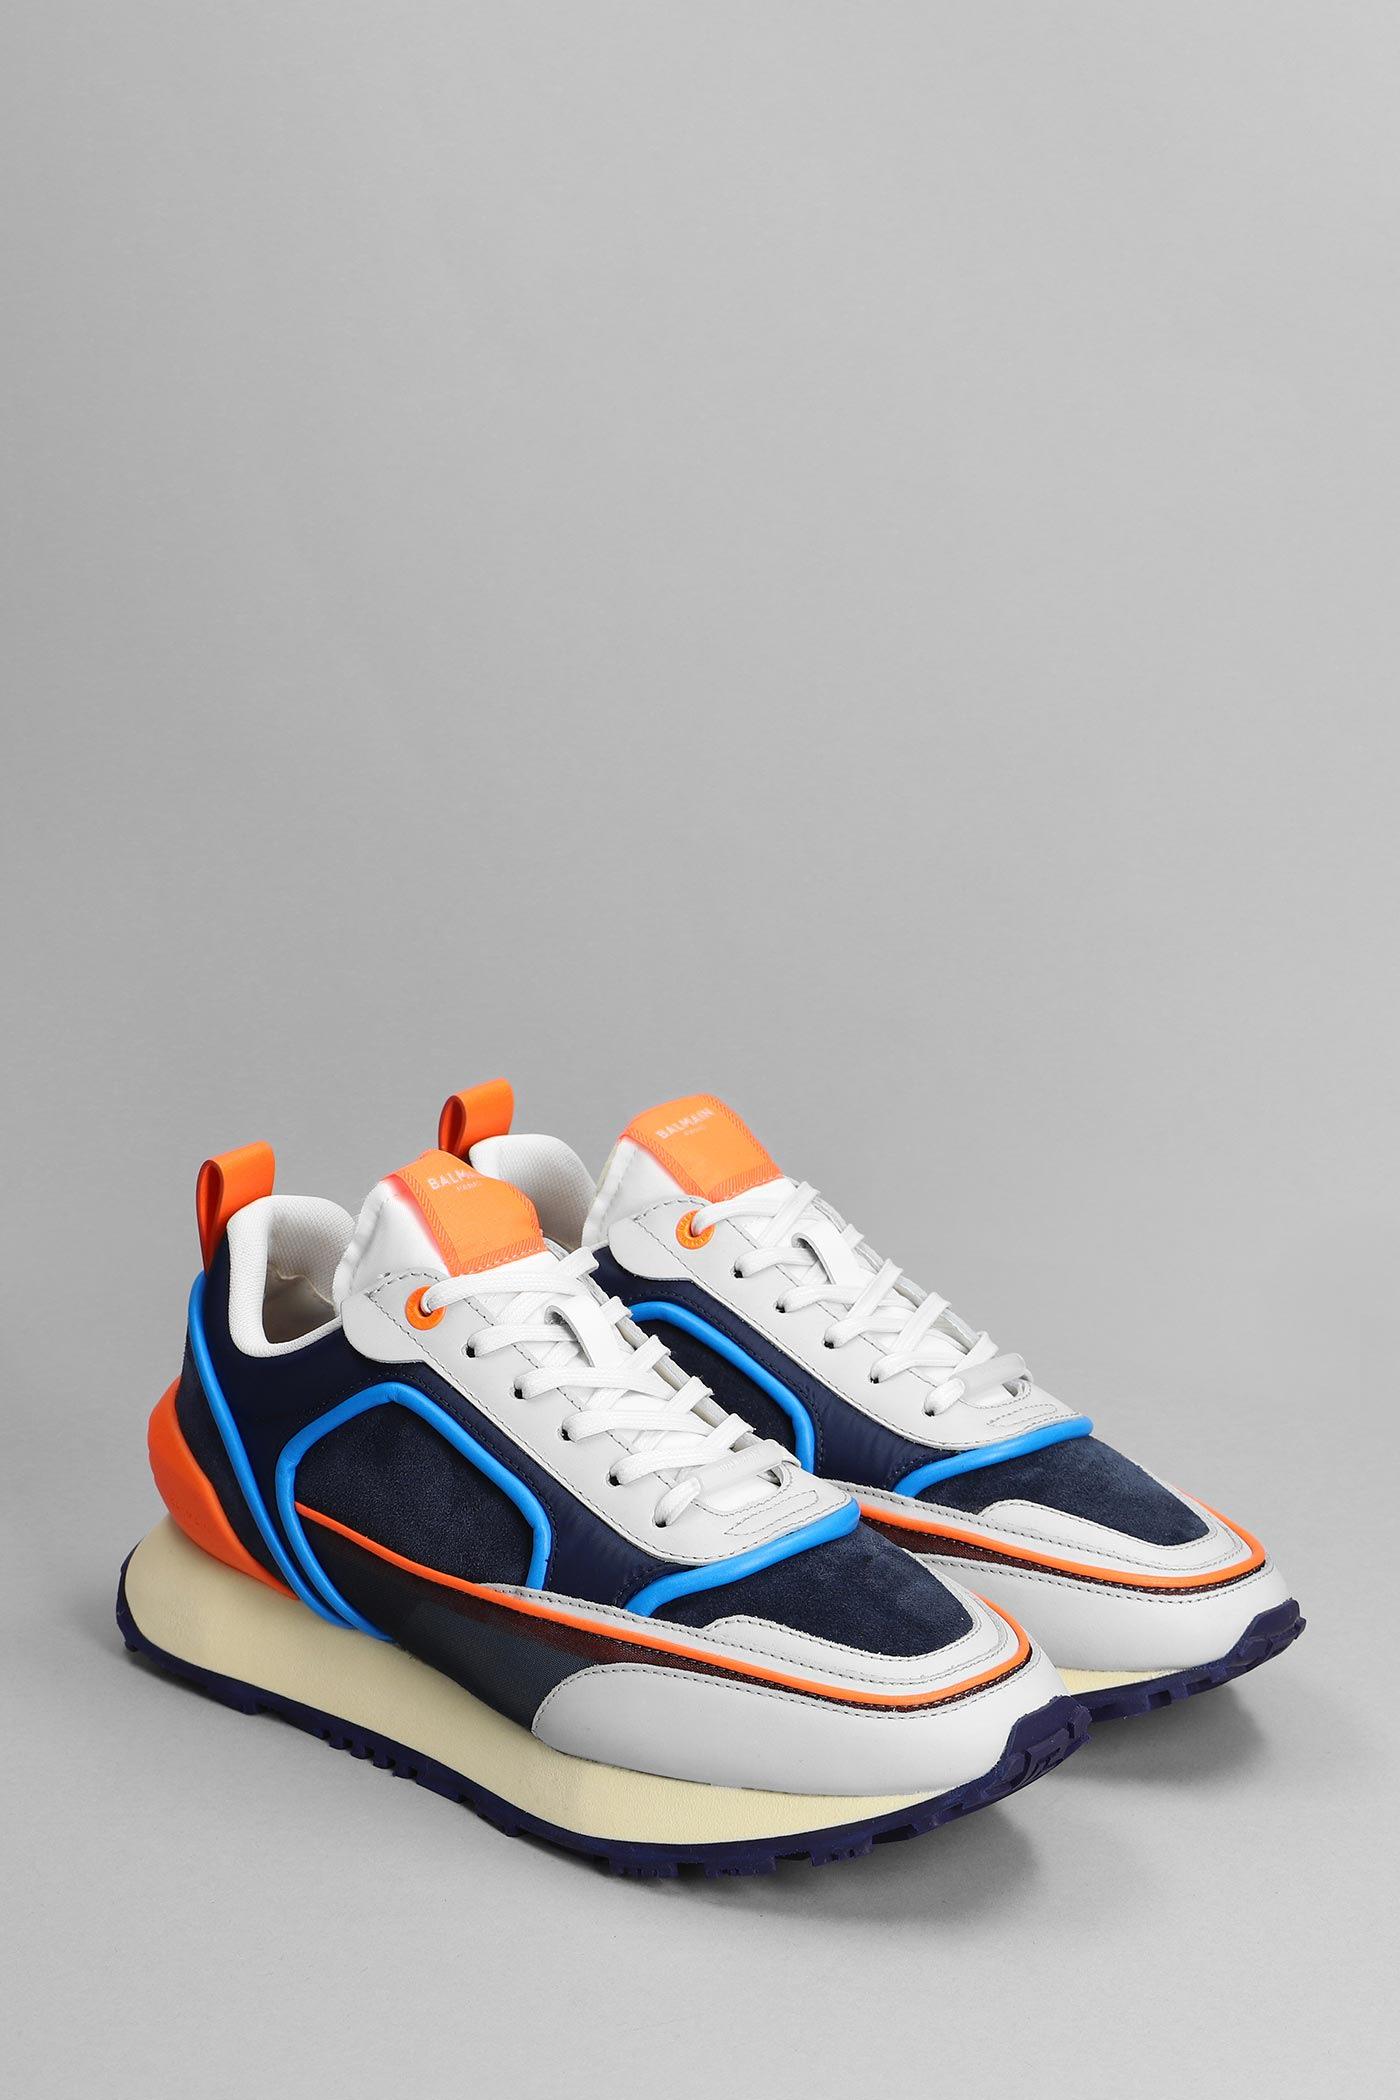 Balmain Sneakers In Multicolor Suede And Leather for Men - Save 38% | Lyst